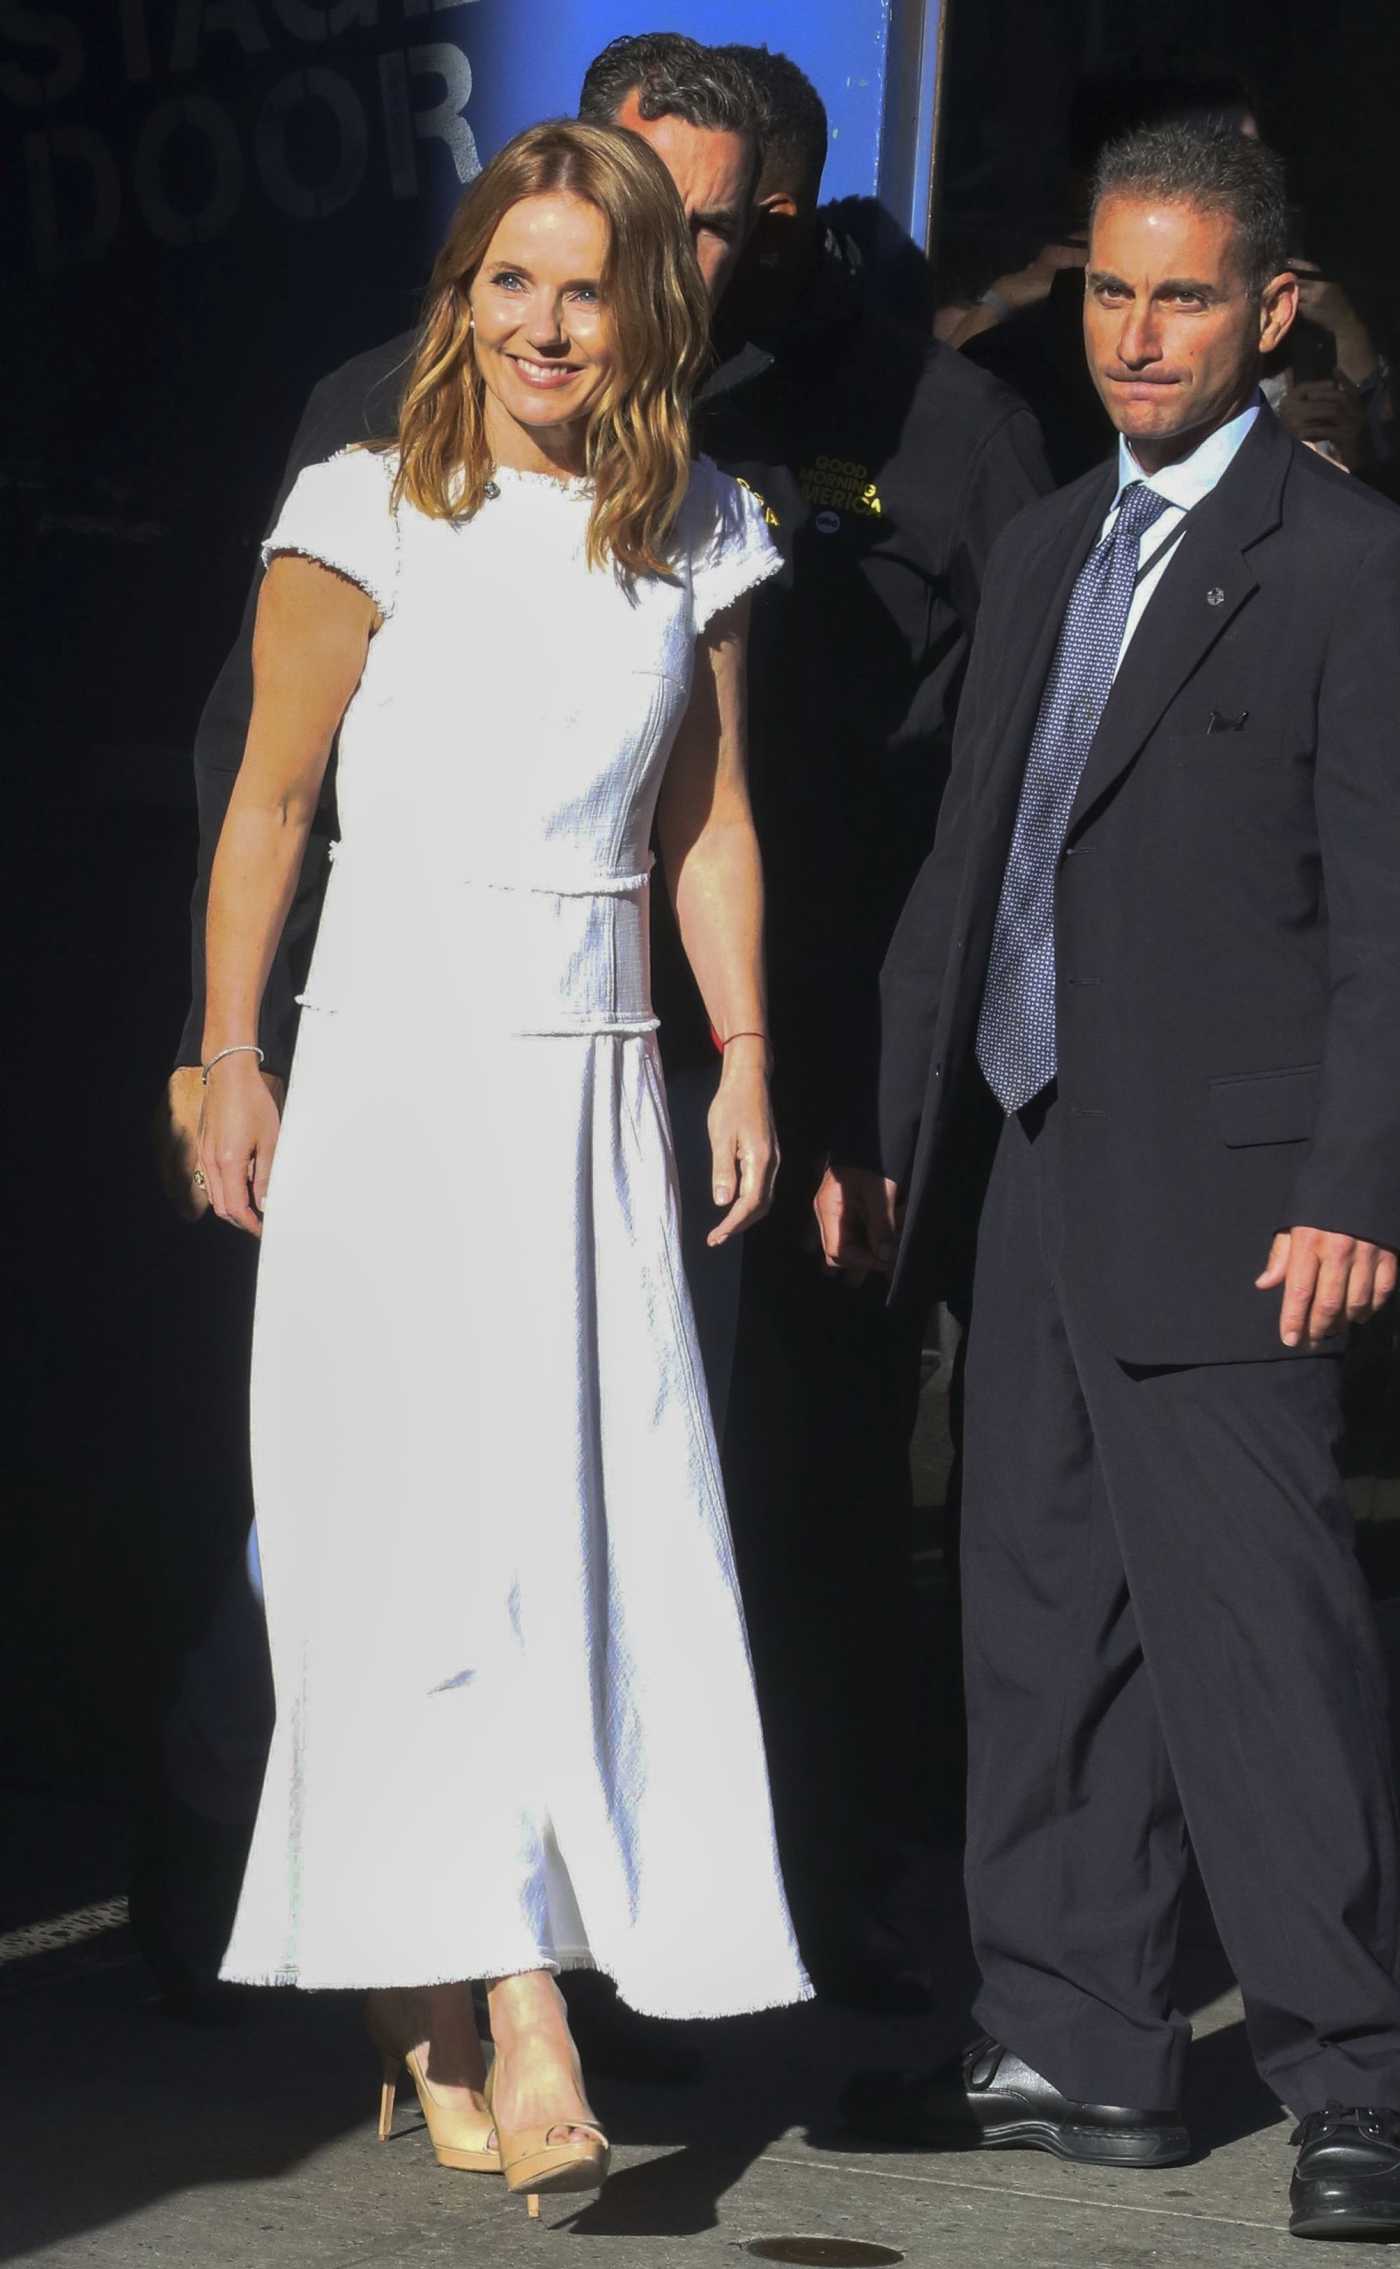 Geri Halliwell in a White Dress Made Her Appearance on Good Morning America in New York 10/03/2023